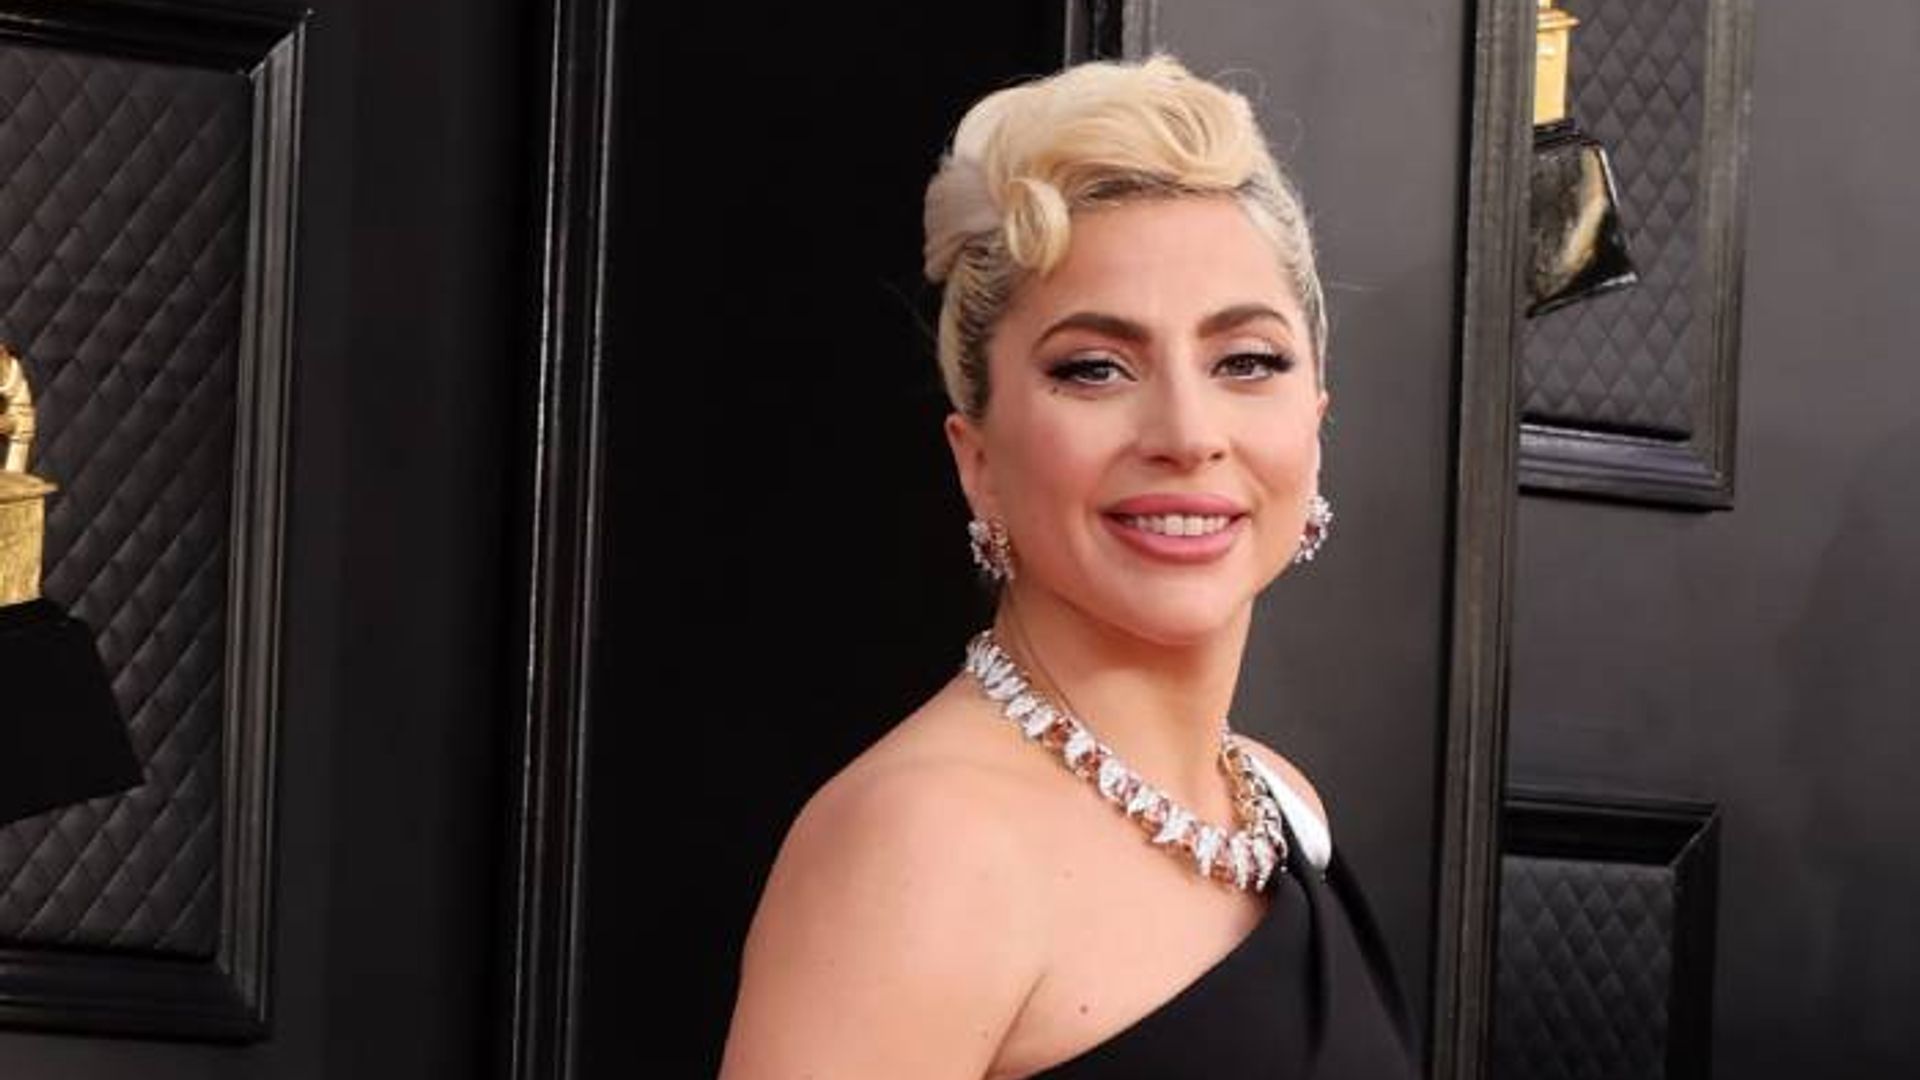 Lady Gaga shares rarely seen makeup-free selfie and wow